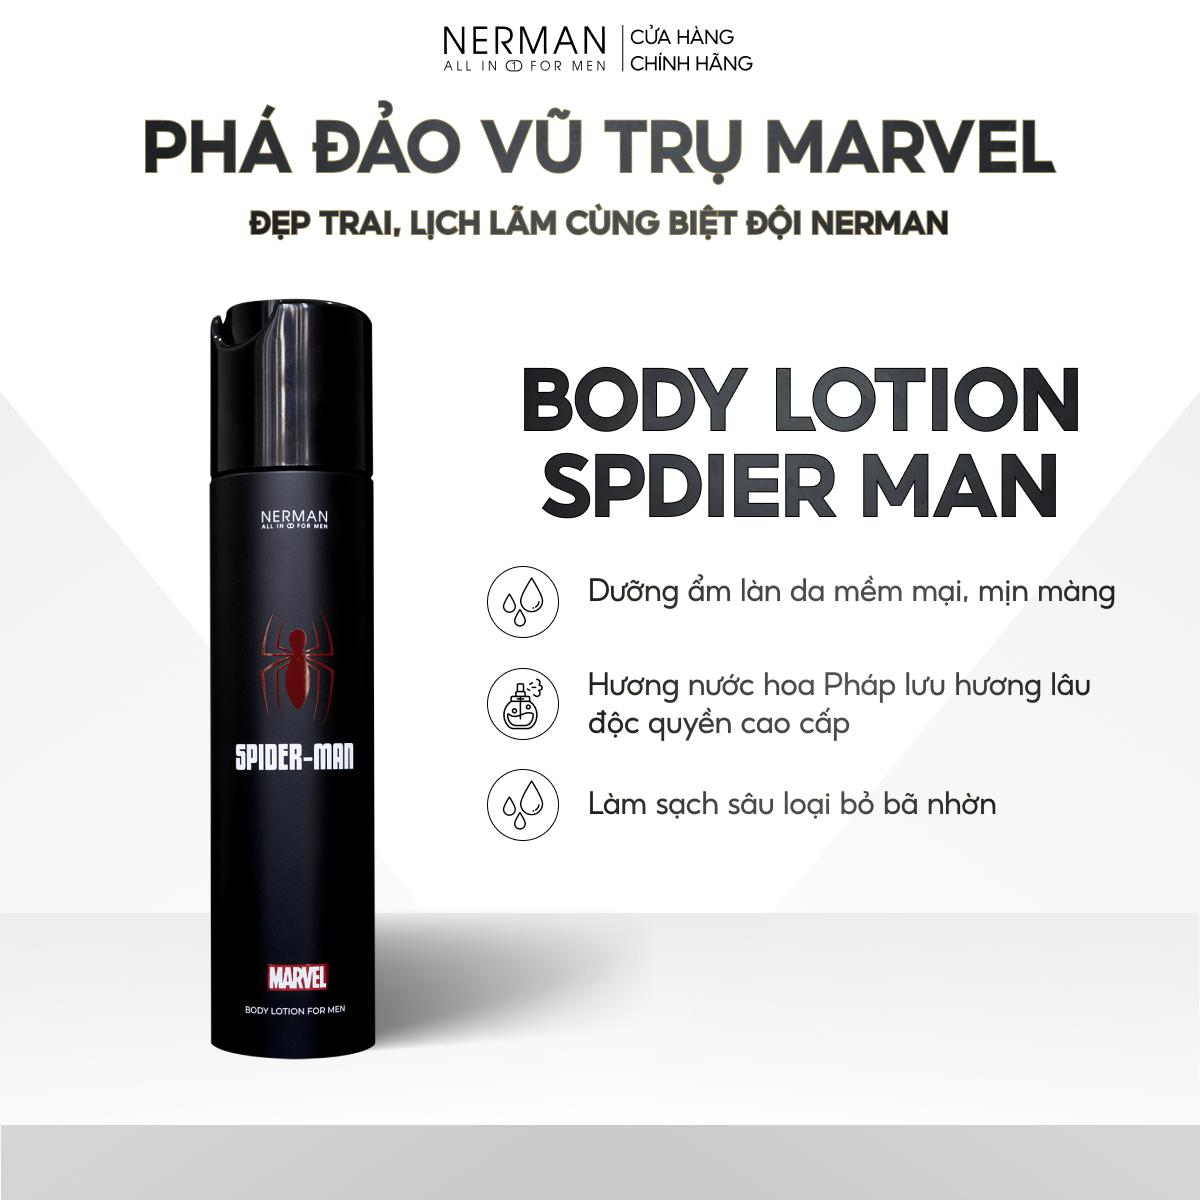 Combo Marvel Collection Nerman 1-  Sữa tắm gội 2 in 1 350g & Body lotion 180g